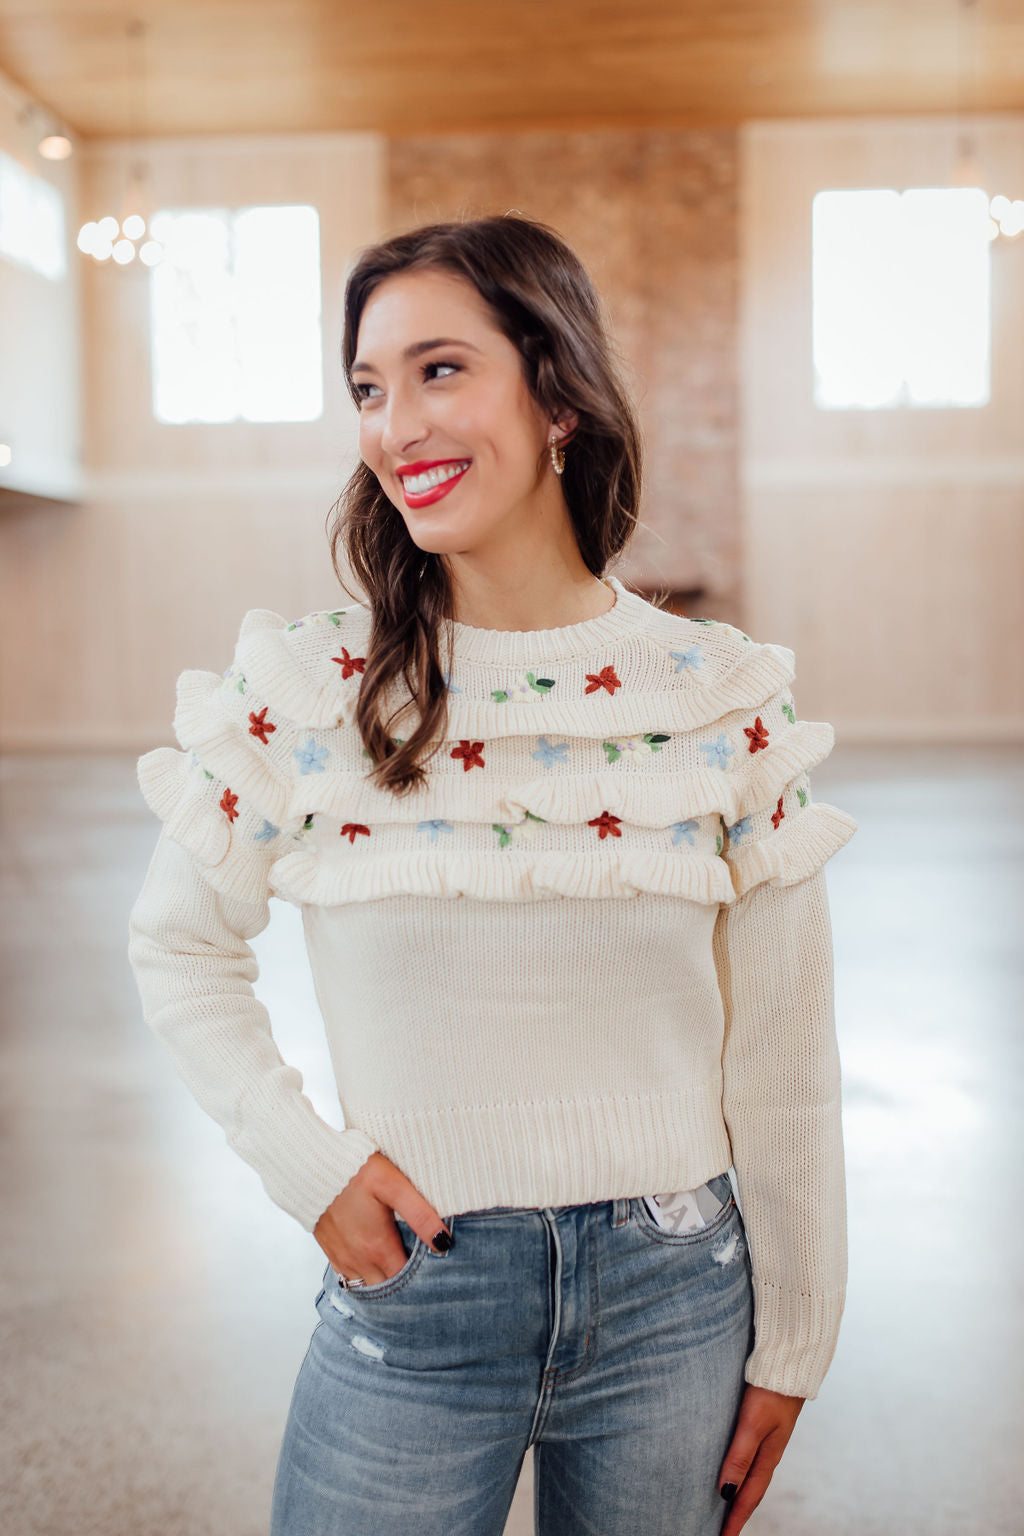 The Warm Wishes Sweater